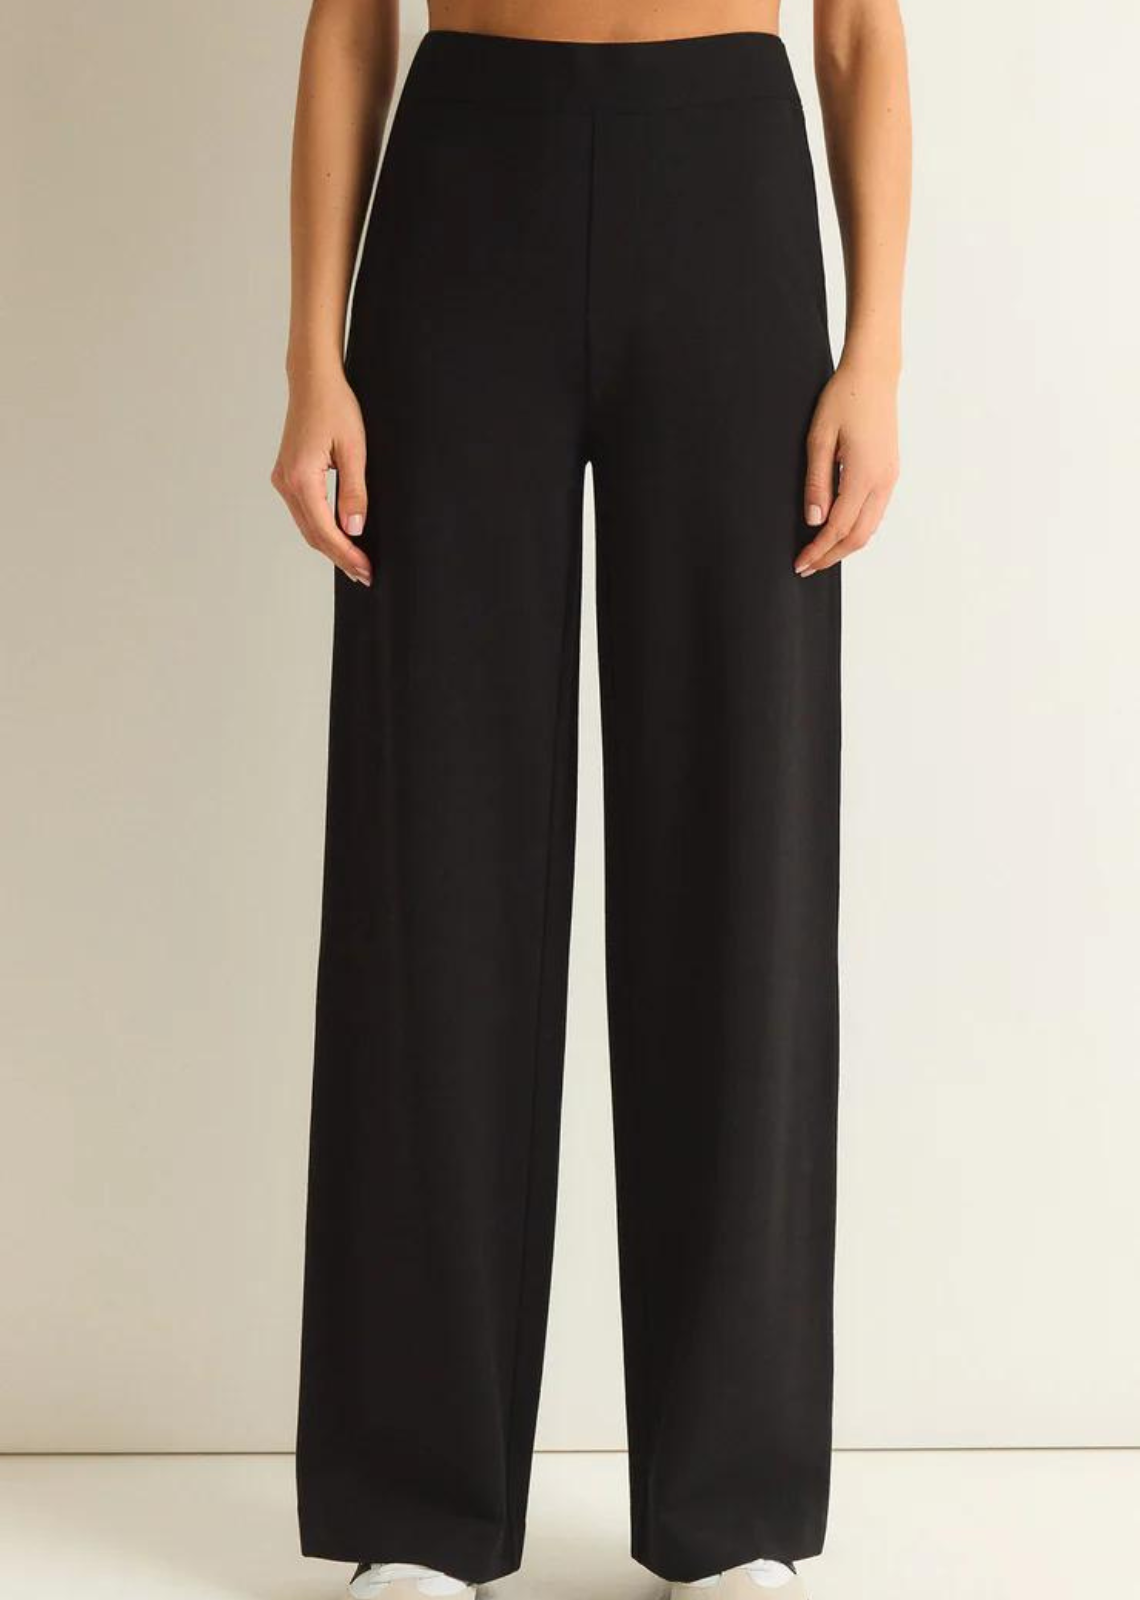 Deluxe Ruched Front High Waist Satin Pants - Fashionaire She